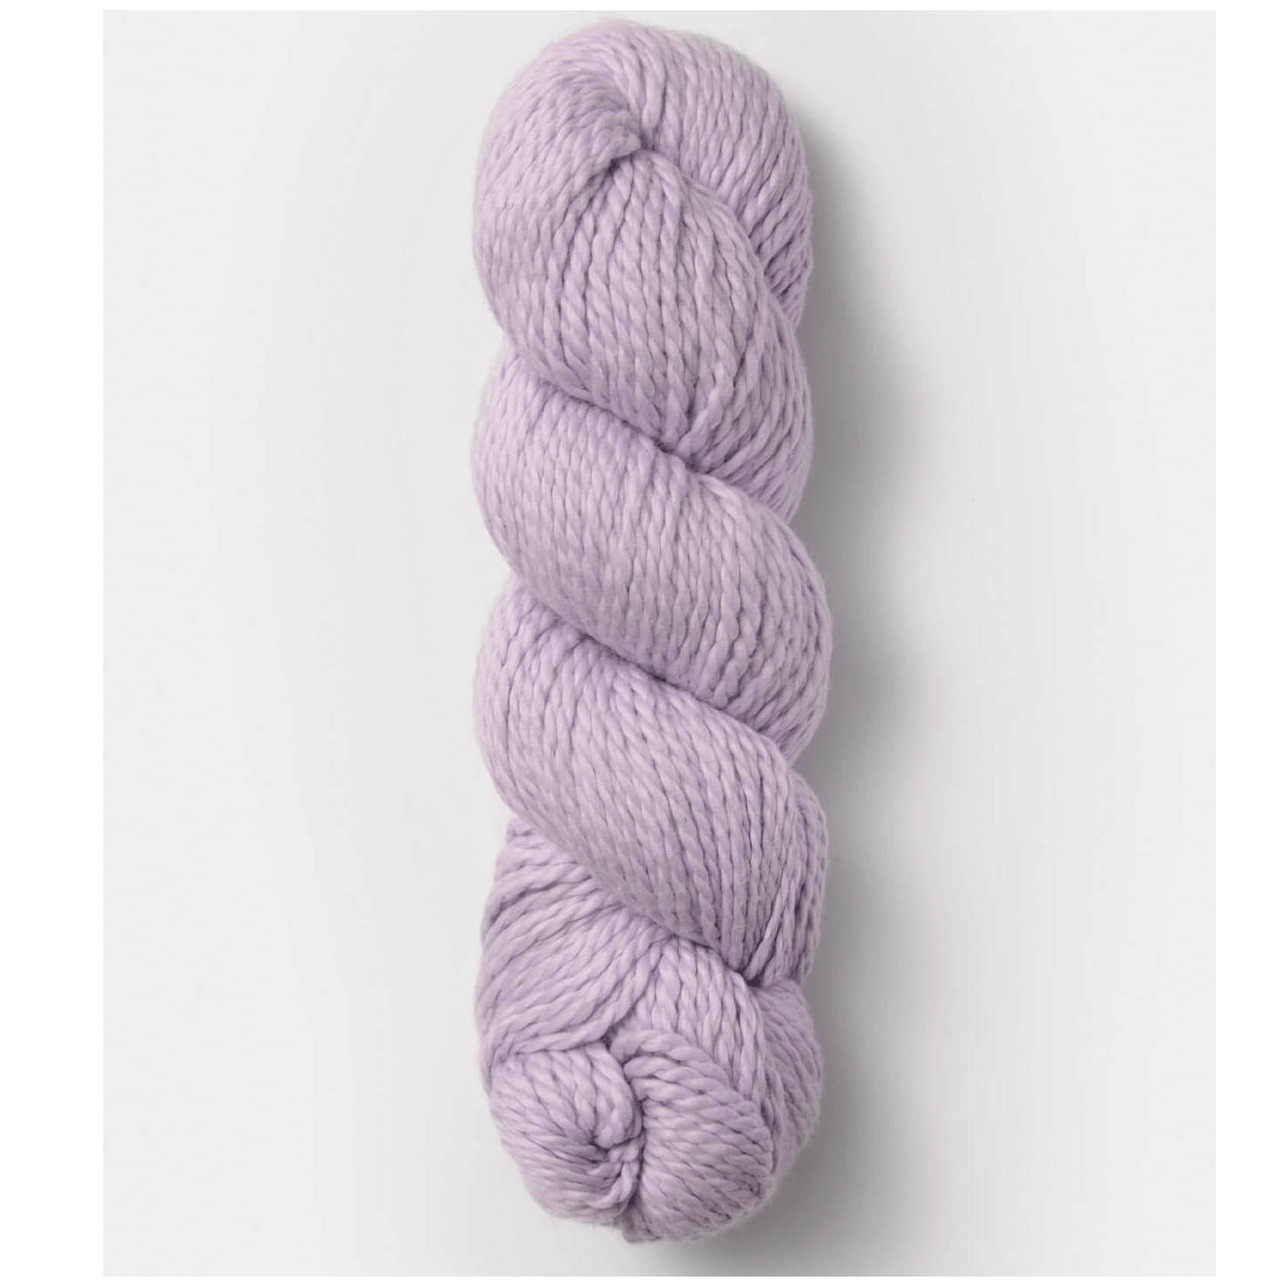 Blue Sky Fibers Worsted Organic Cotton Yarn at WOOLS OF NATIONS